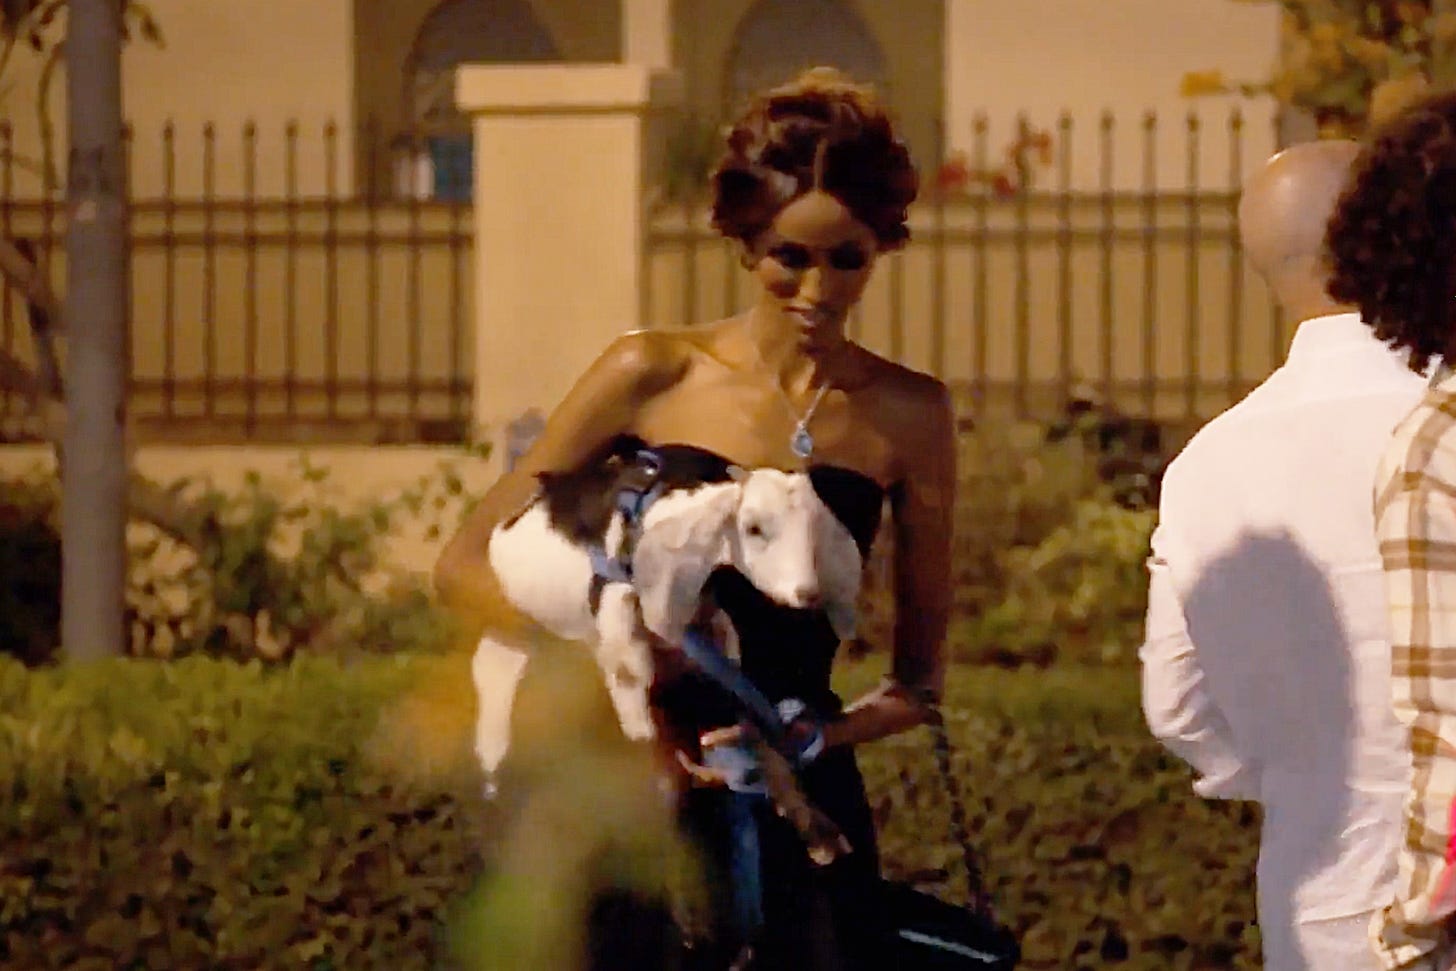 Image: Supermodel Chanel Ayan carries a goat into a semi-formal party